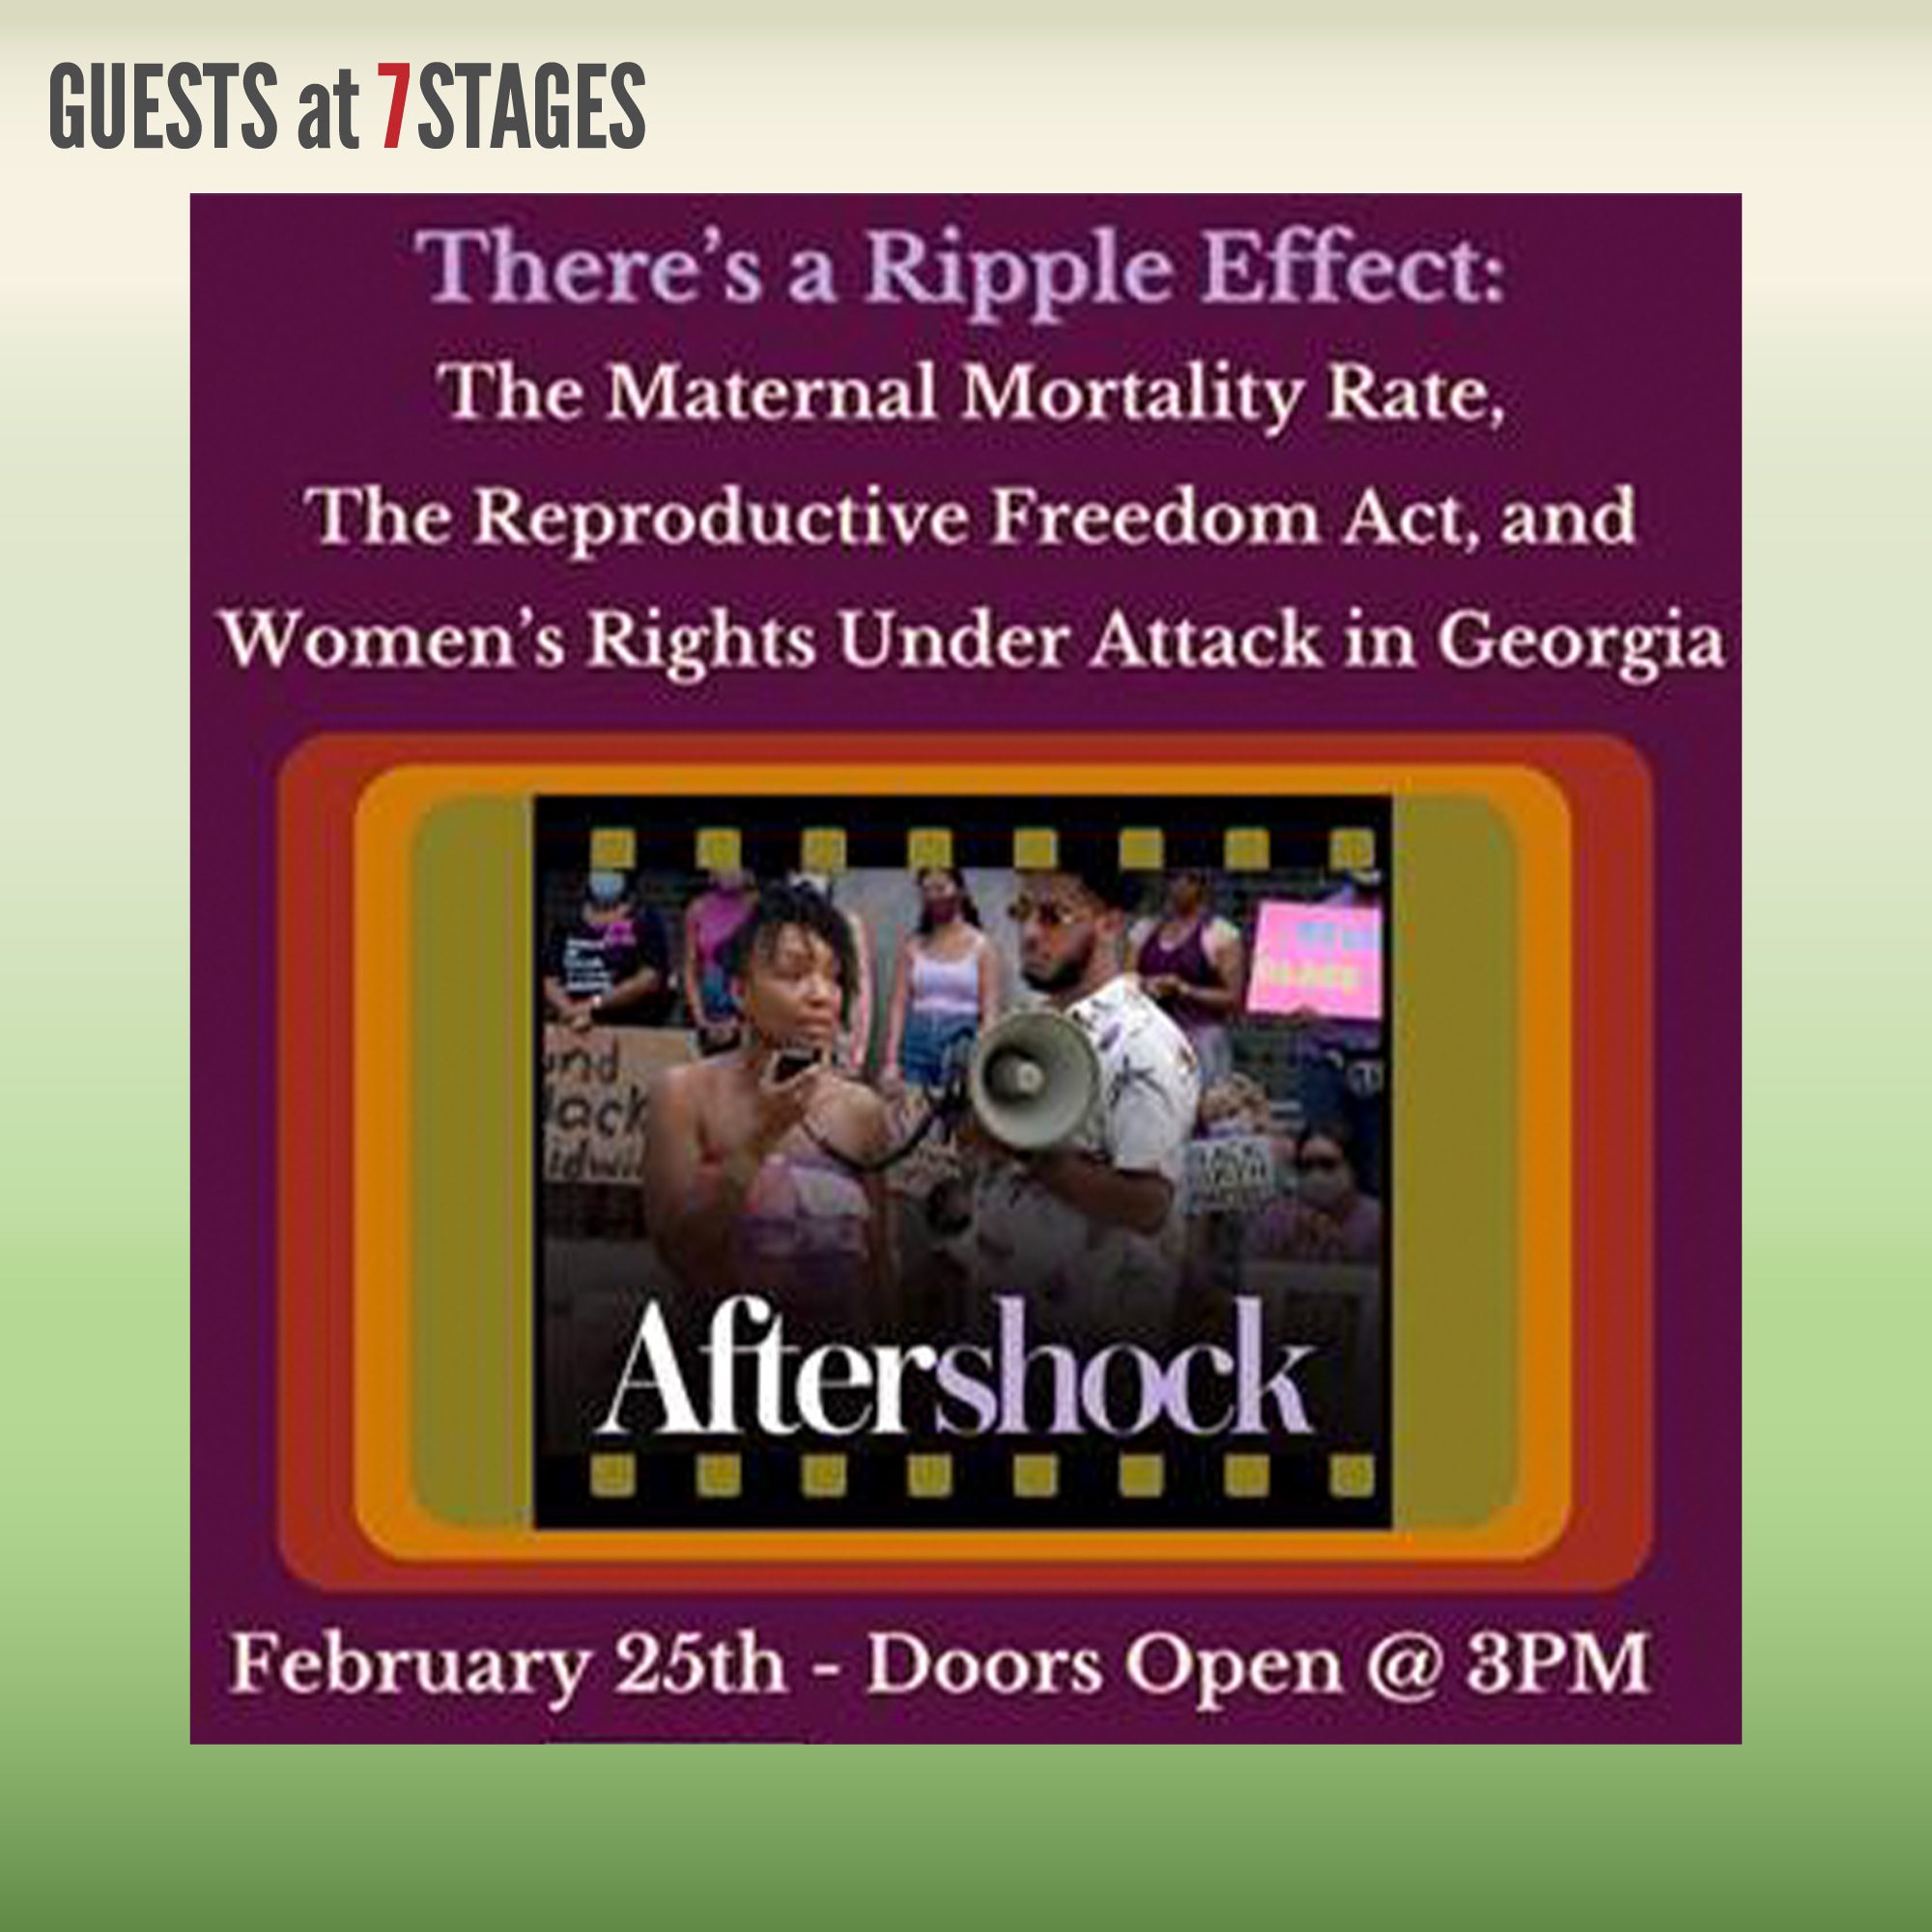 There's a Ripple Effect. The Maternal Mortality Rate, The Reproductive Freedom Act, and Women's Rights Under Attack in Georgia. February 25th - Doors open at 3 P.M.